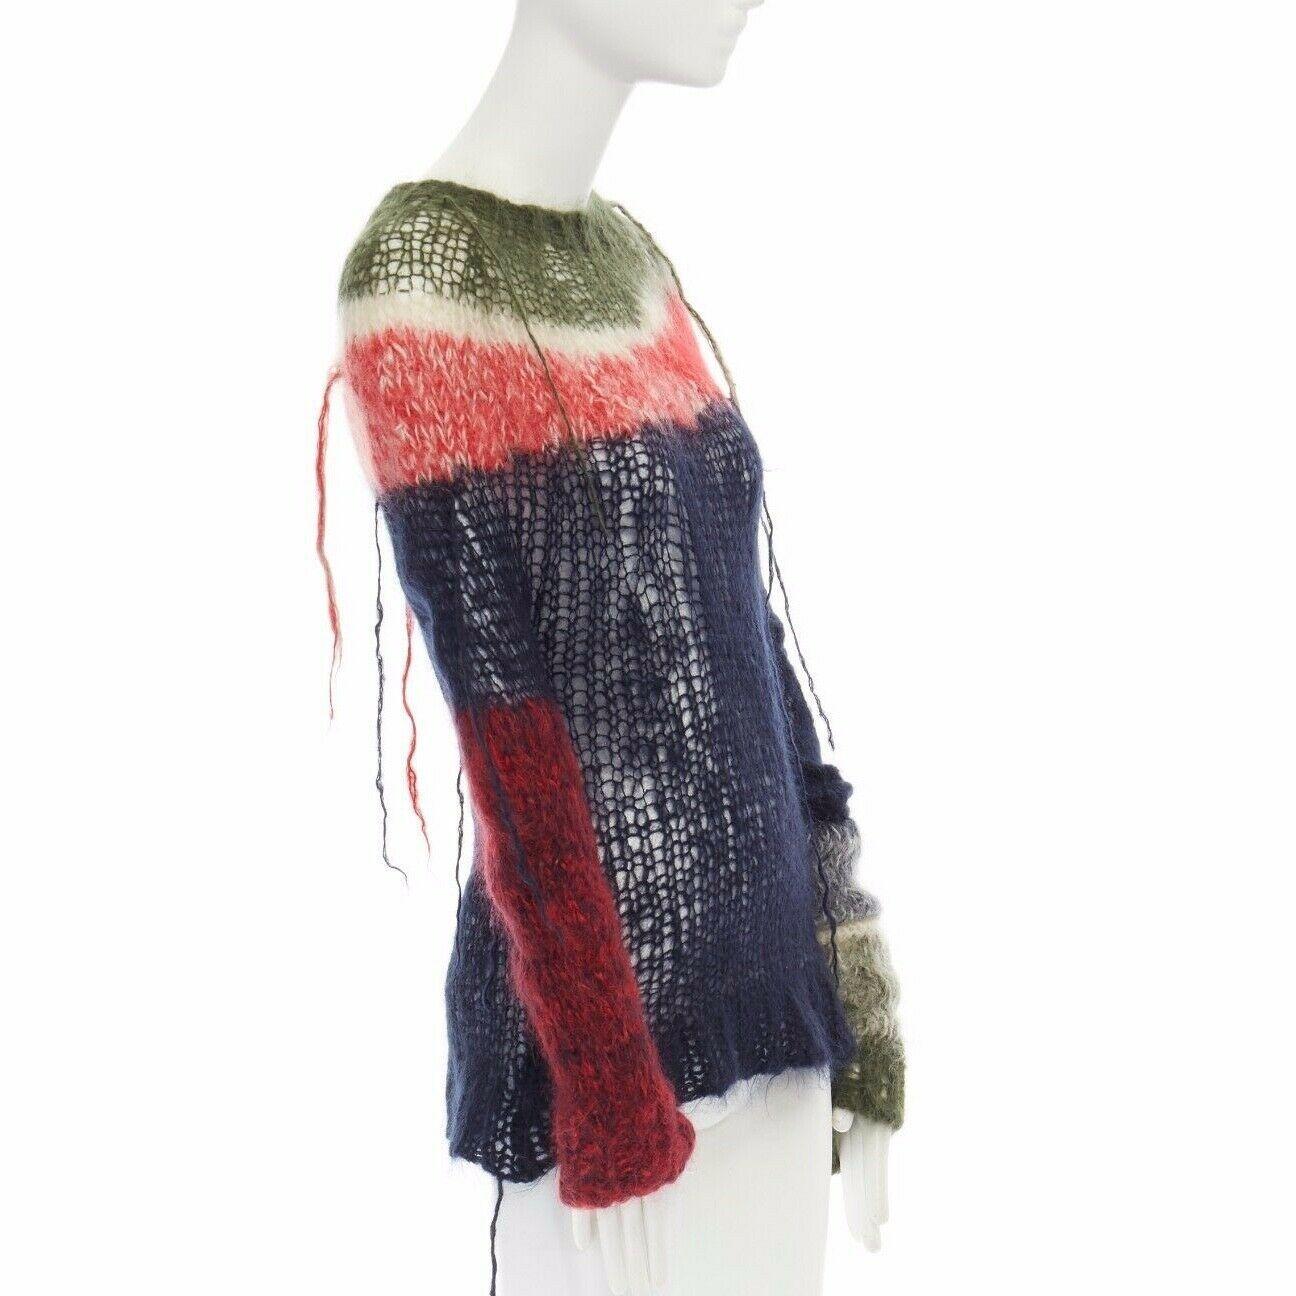 runway JUNYA WATANABE AW2006 punk green red blue loose wool knit sweater top S

JUNYA WATANABE
AS SEEN ON RUNWAY AUTUMN WINTER 2006
PART OF THE PERMANENT COLLECTION OF THE METROPOLITAN MUSEUM, NYC
SHOWCASED IN THE MET'S 